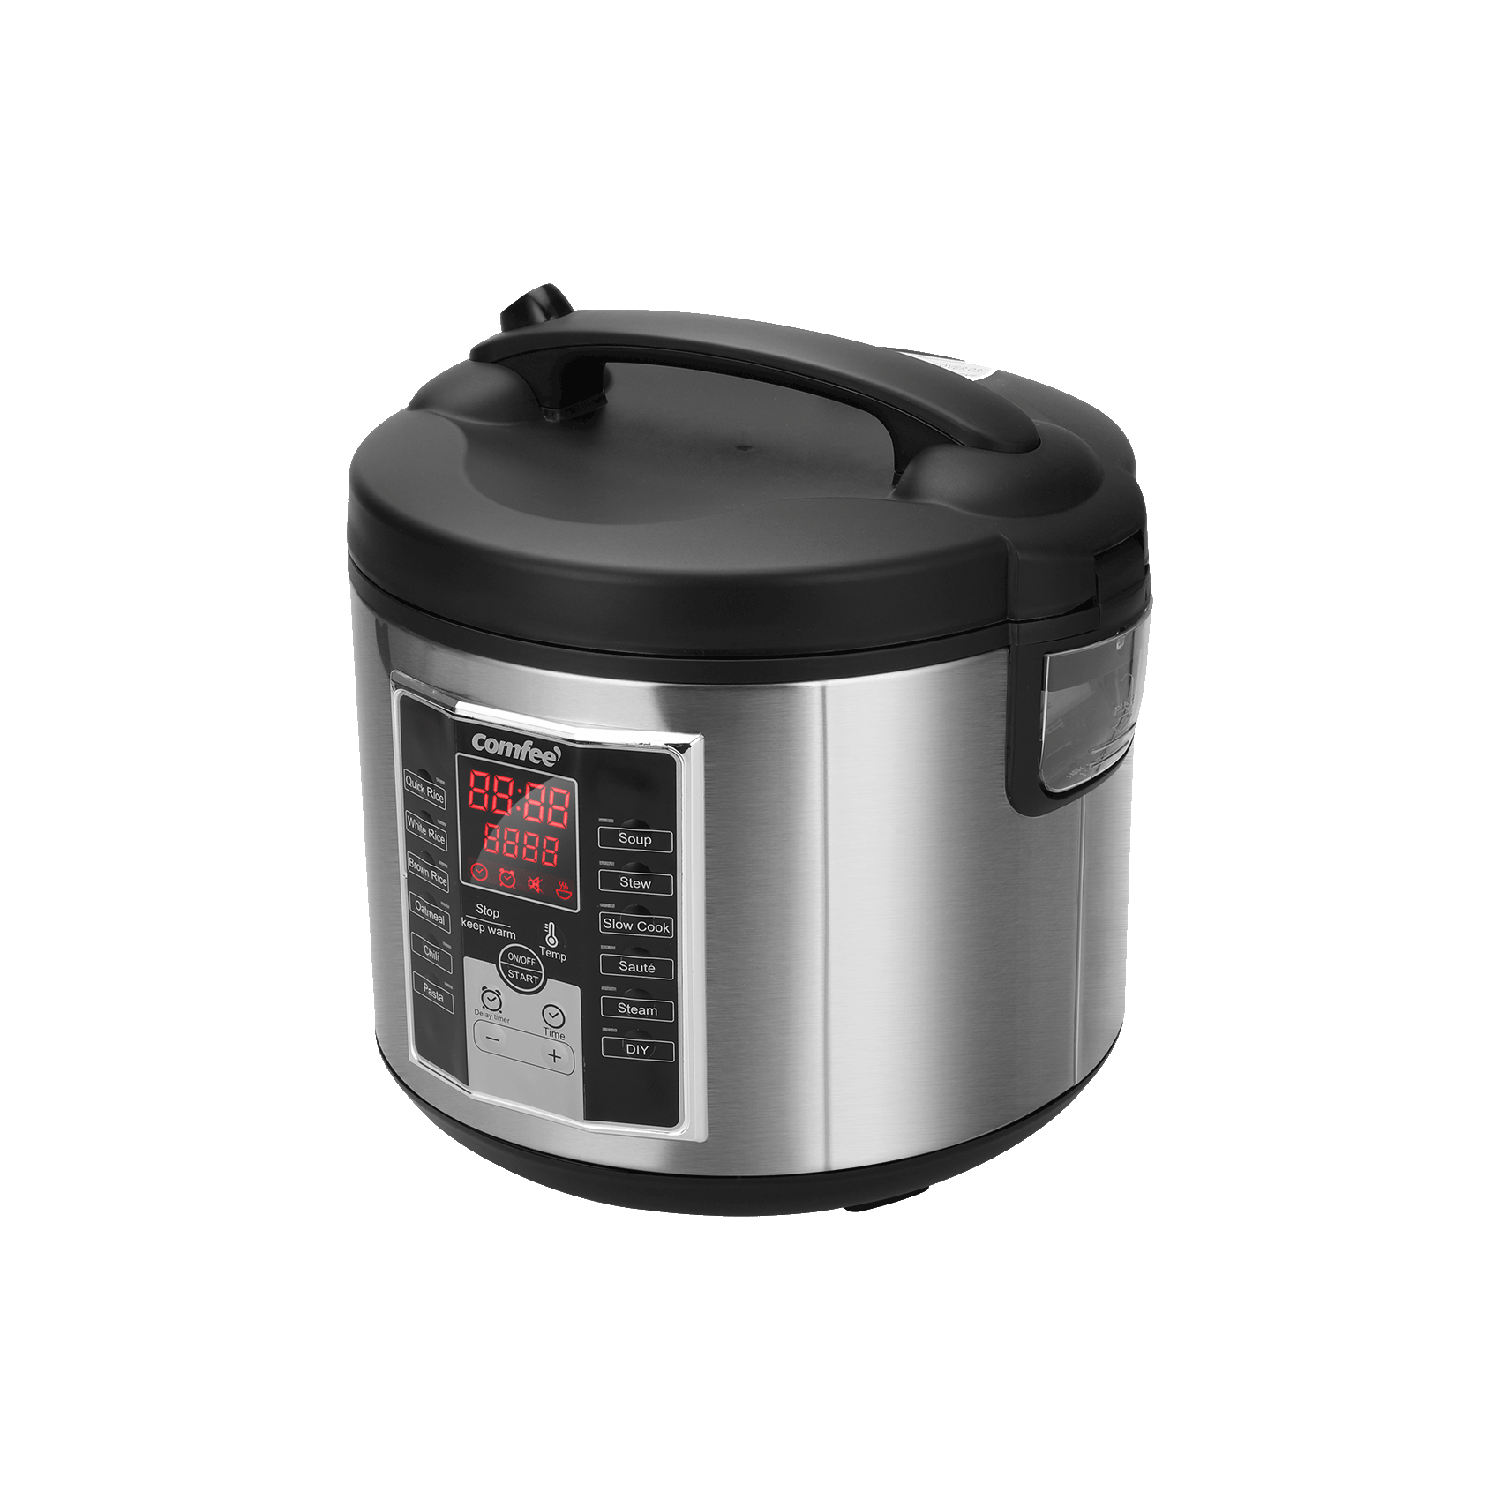 https://d1pjg4o0tbonat.cloudfront.net/content/dam/comfee-aem/global/products/small-appliances/all-in-1-multi-cooker-rice-cooker-mb-m25/kv2.png/jcr:content/renditions/cq5dam.compression.png